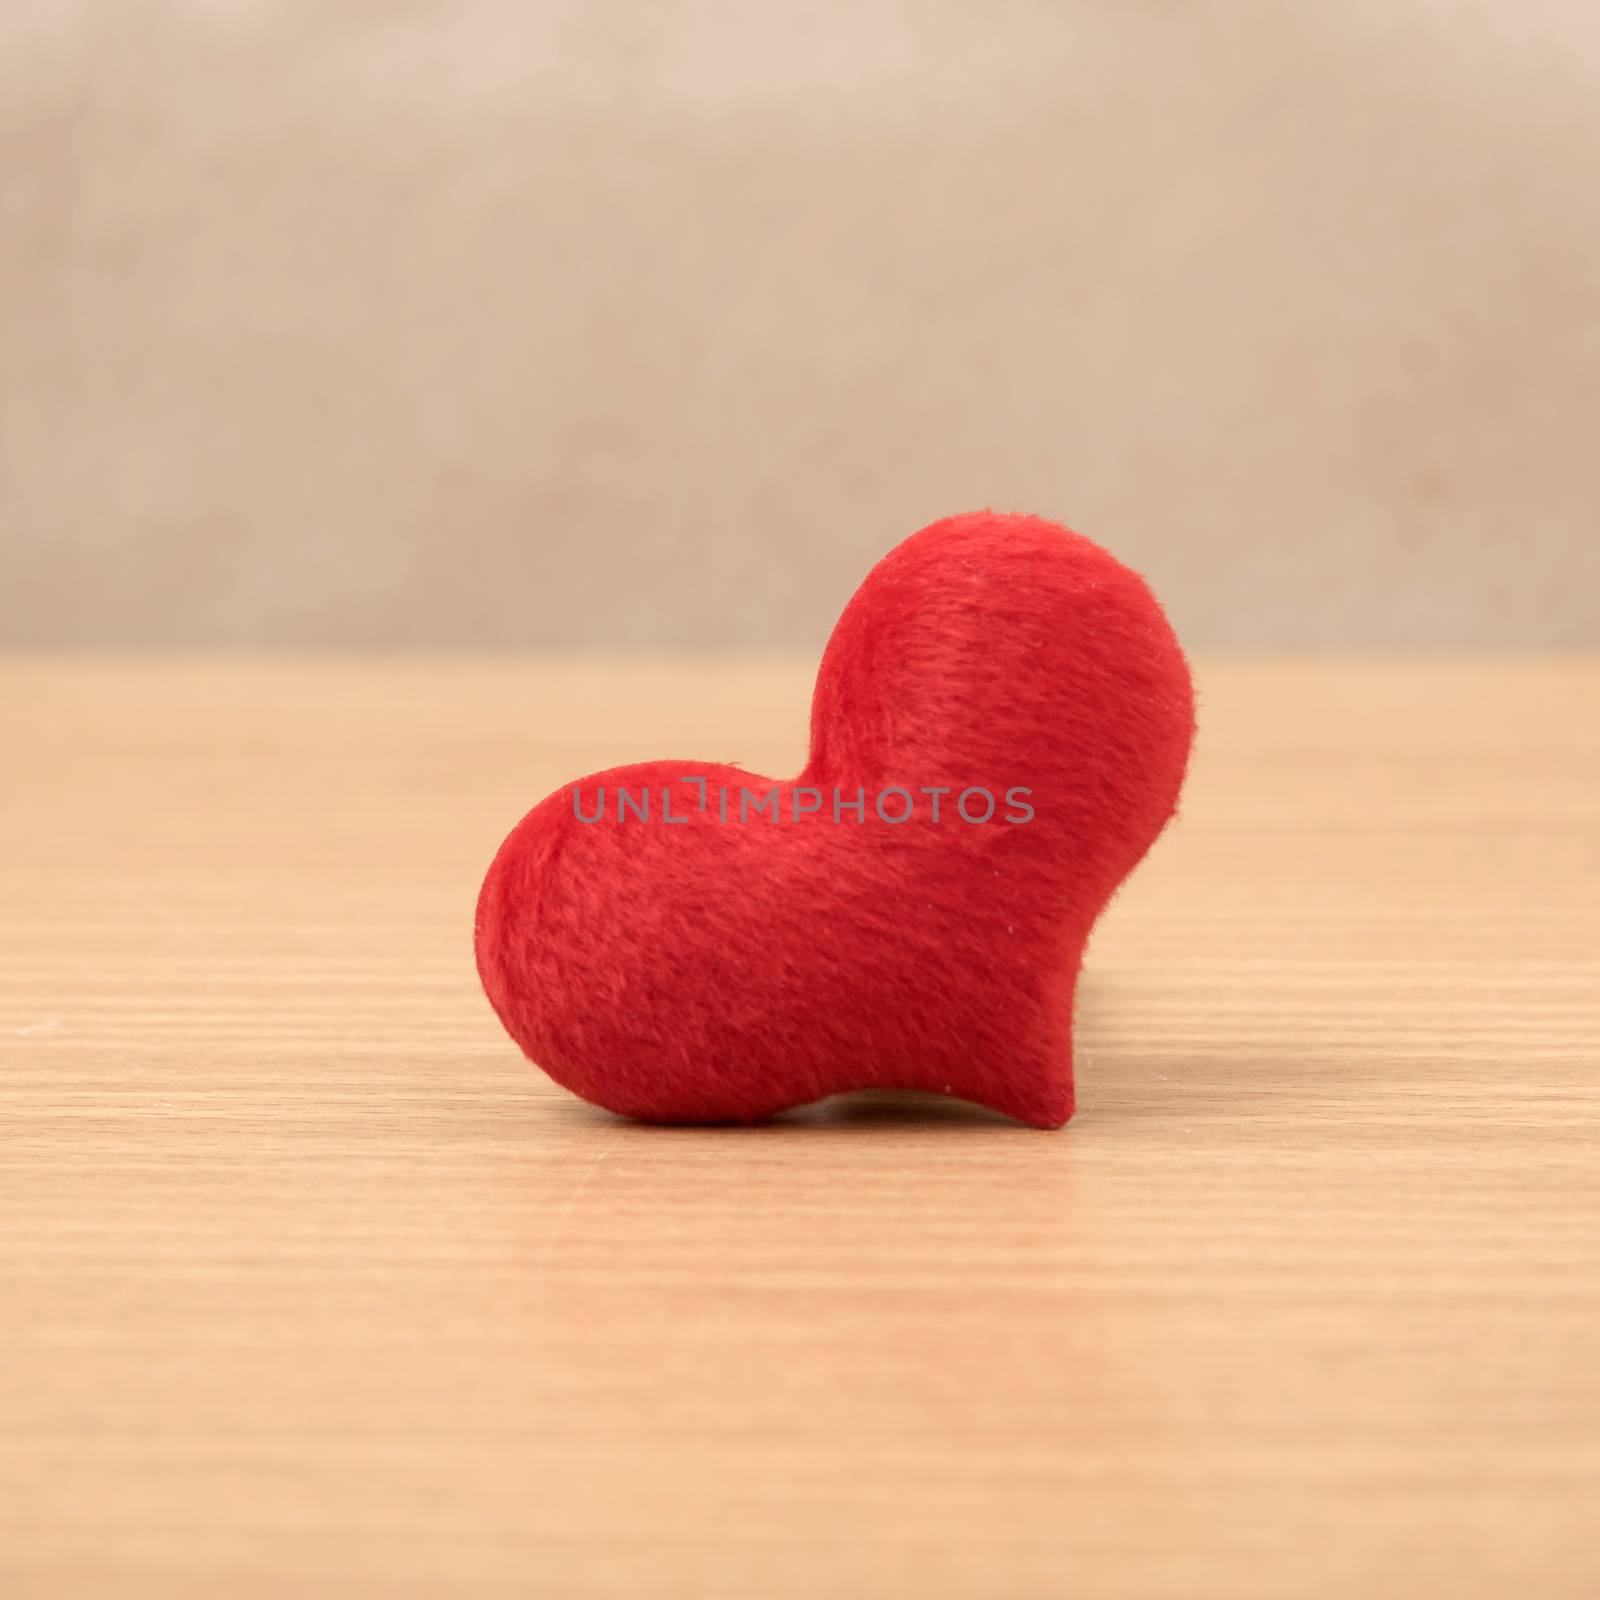 red heart on wood by ammza12